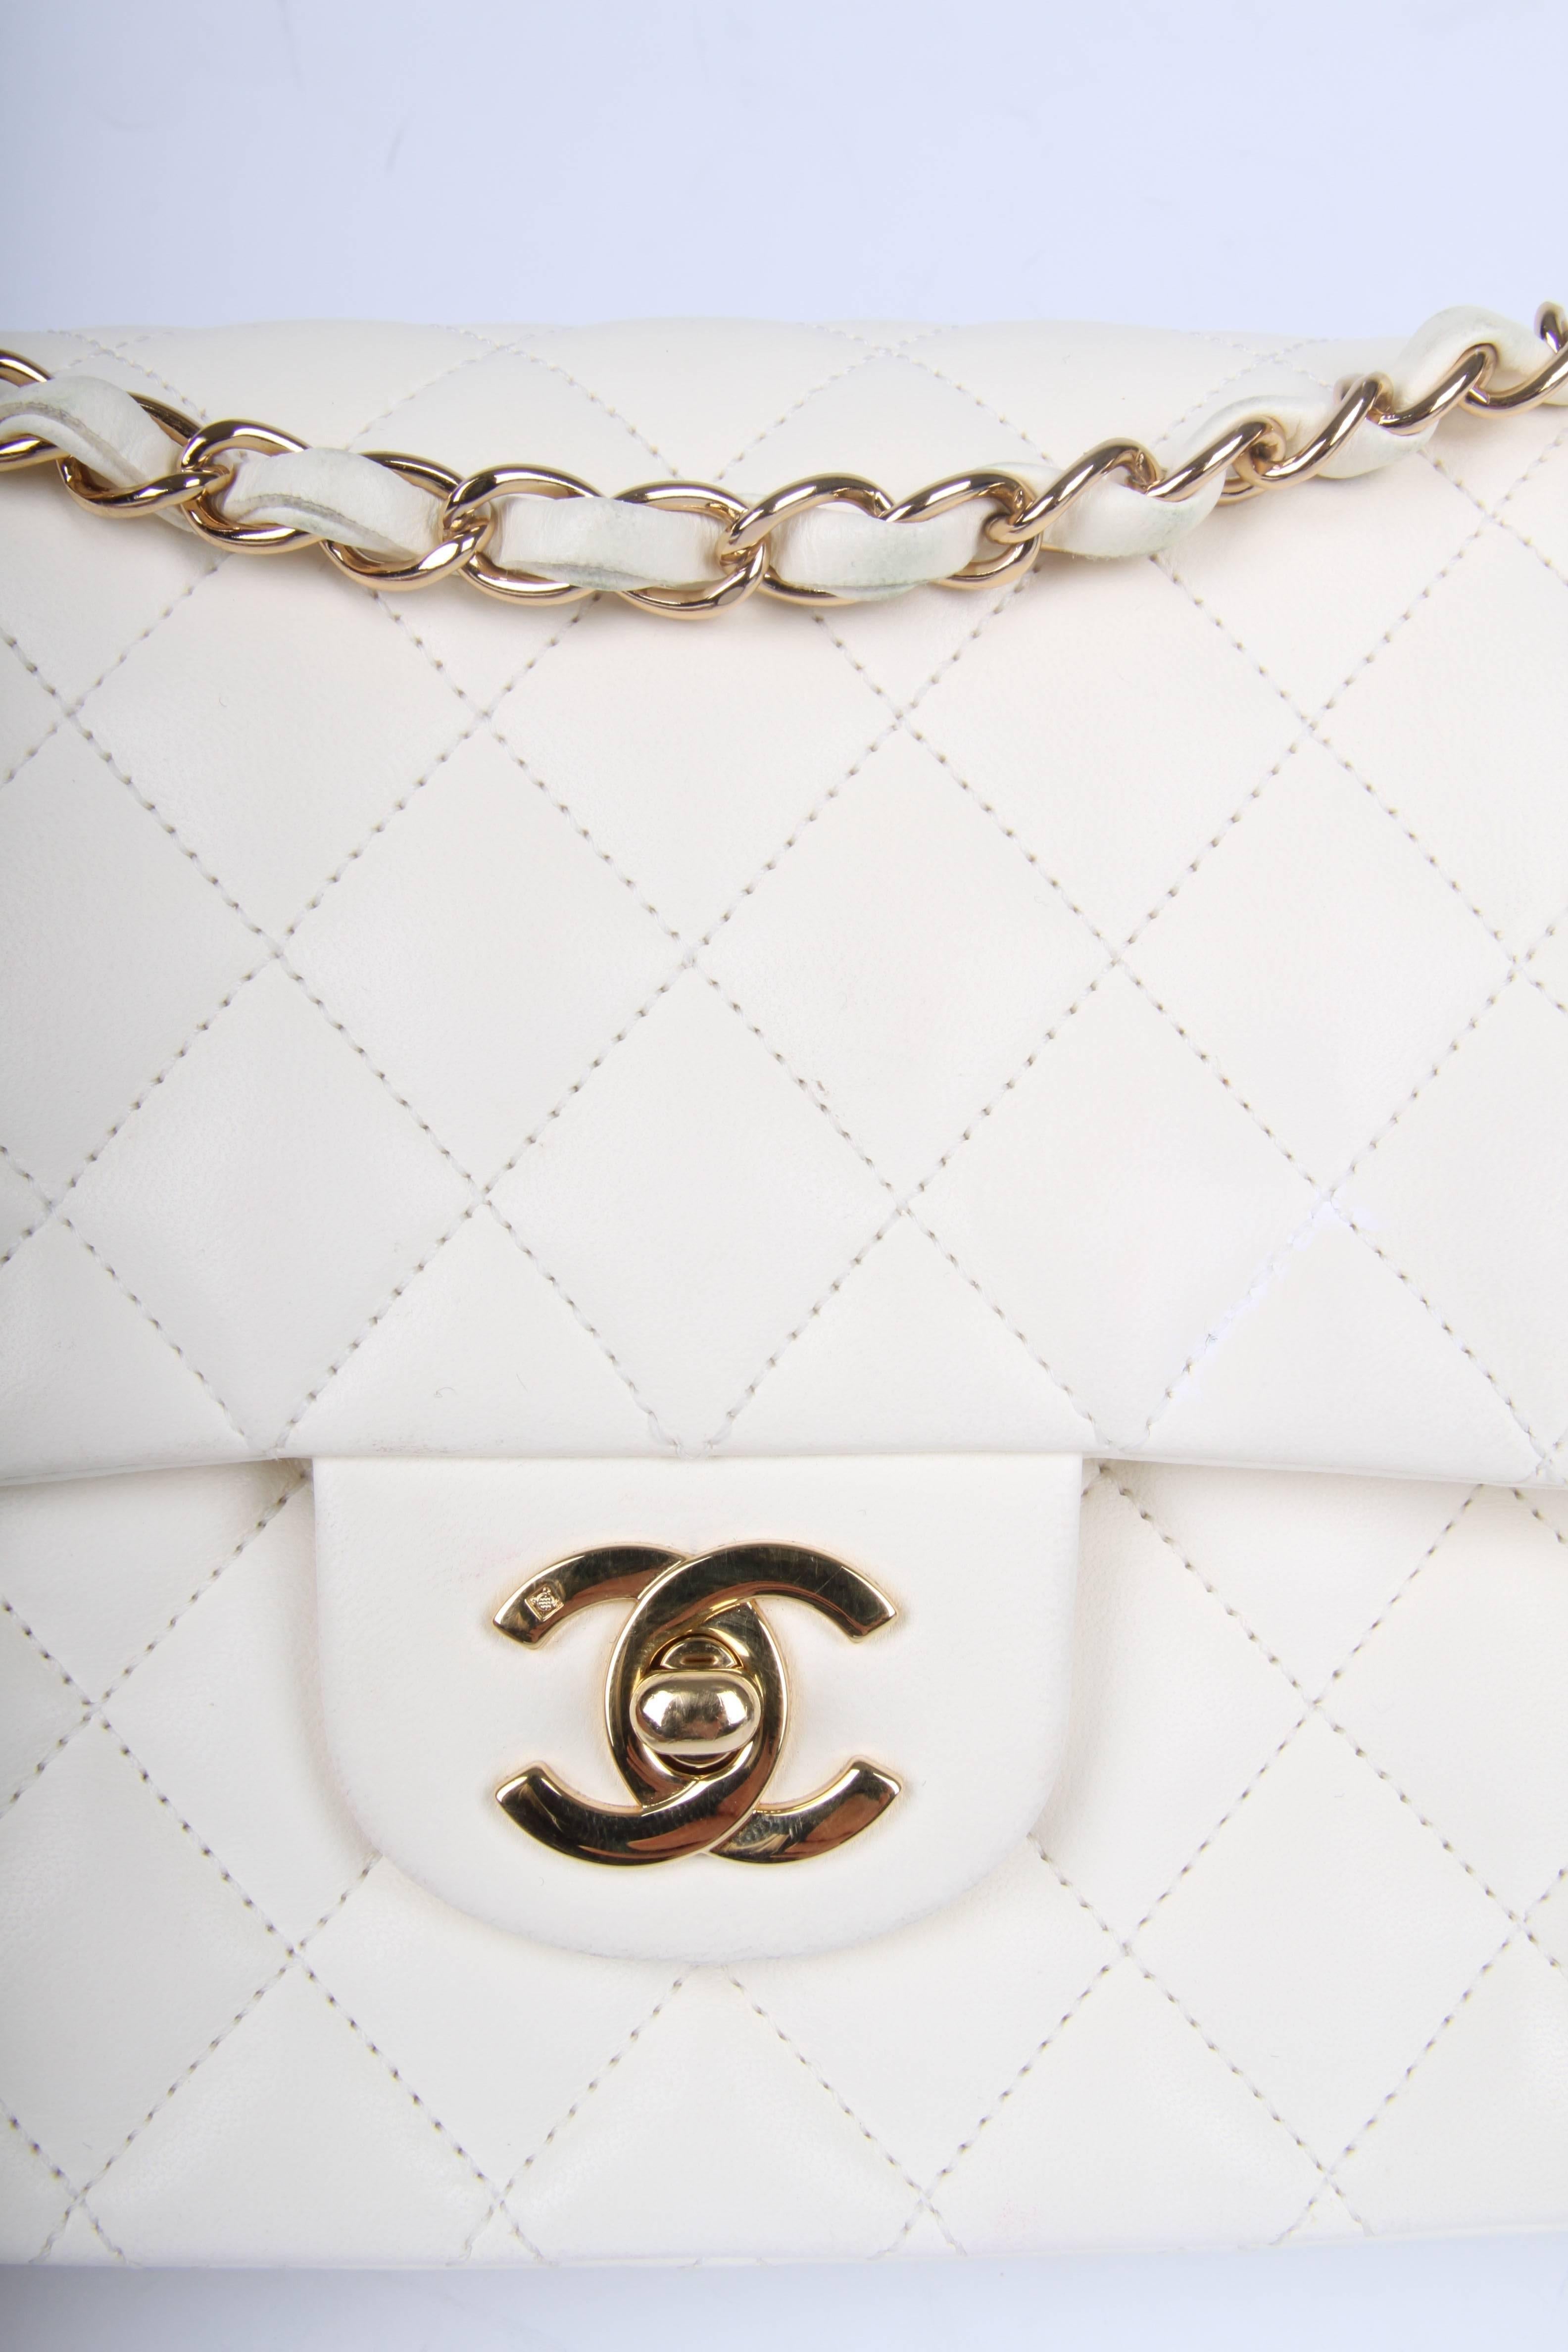 Classic bag by Chanel in ivory white lambskin leather. Perfect!

This 2.55 medium double flap bag is the middle size of this classic model. A gold-tone chain entwined with leather, which can be worn single or double and a CC turn-lock closure, both